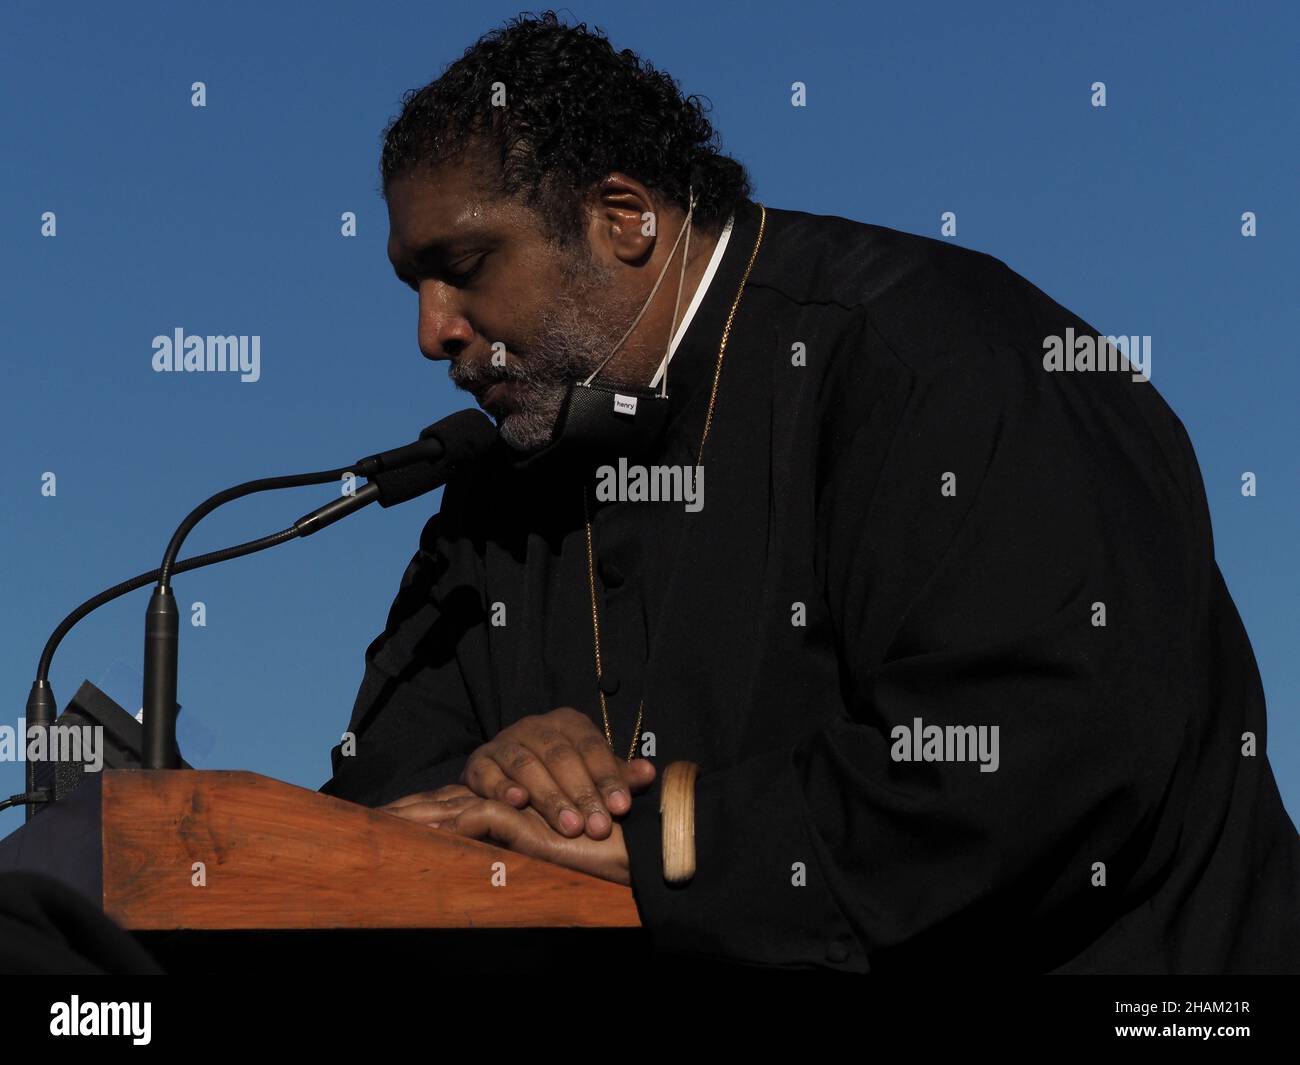 December 13, 2021, Washington, District of Columbia, USA: The Reverend Dr. William J. Barber II, co-chair of the Poor PeopleÃs Campaign, called for the Senate to stop stonewalling and pass voting rights protections and the Build Back Better plan before the end of 2021. (Credit Image: © Sue Dorfman/ZUMA Press Wire) Stock Photo